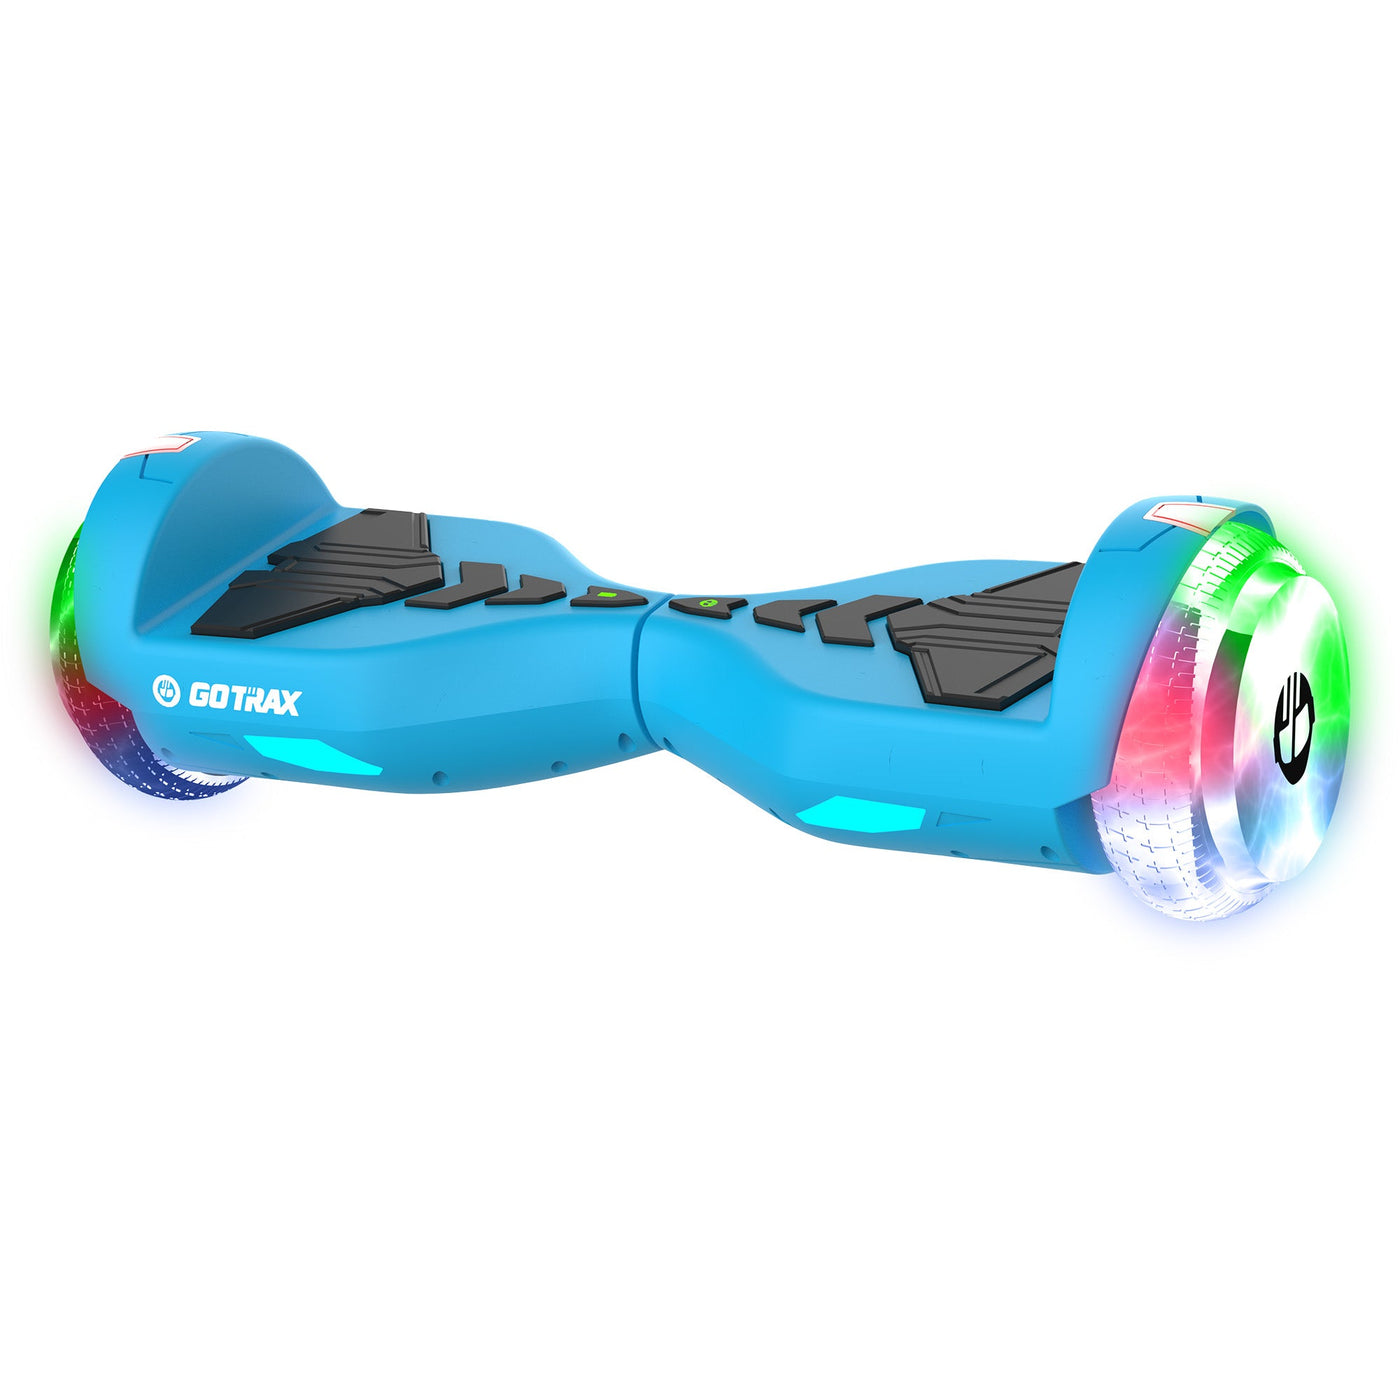 Surge Plus LED Hoverboard 6.3" - GOTRAX